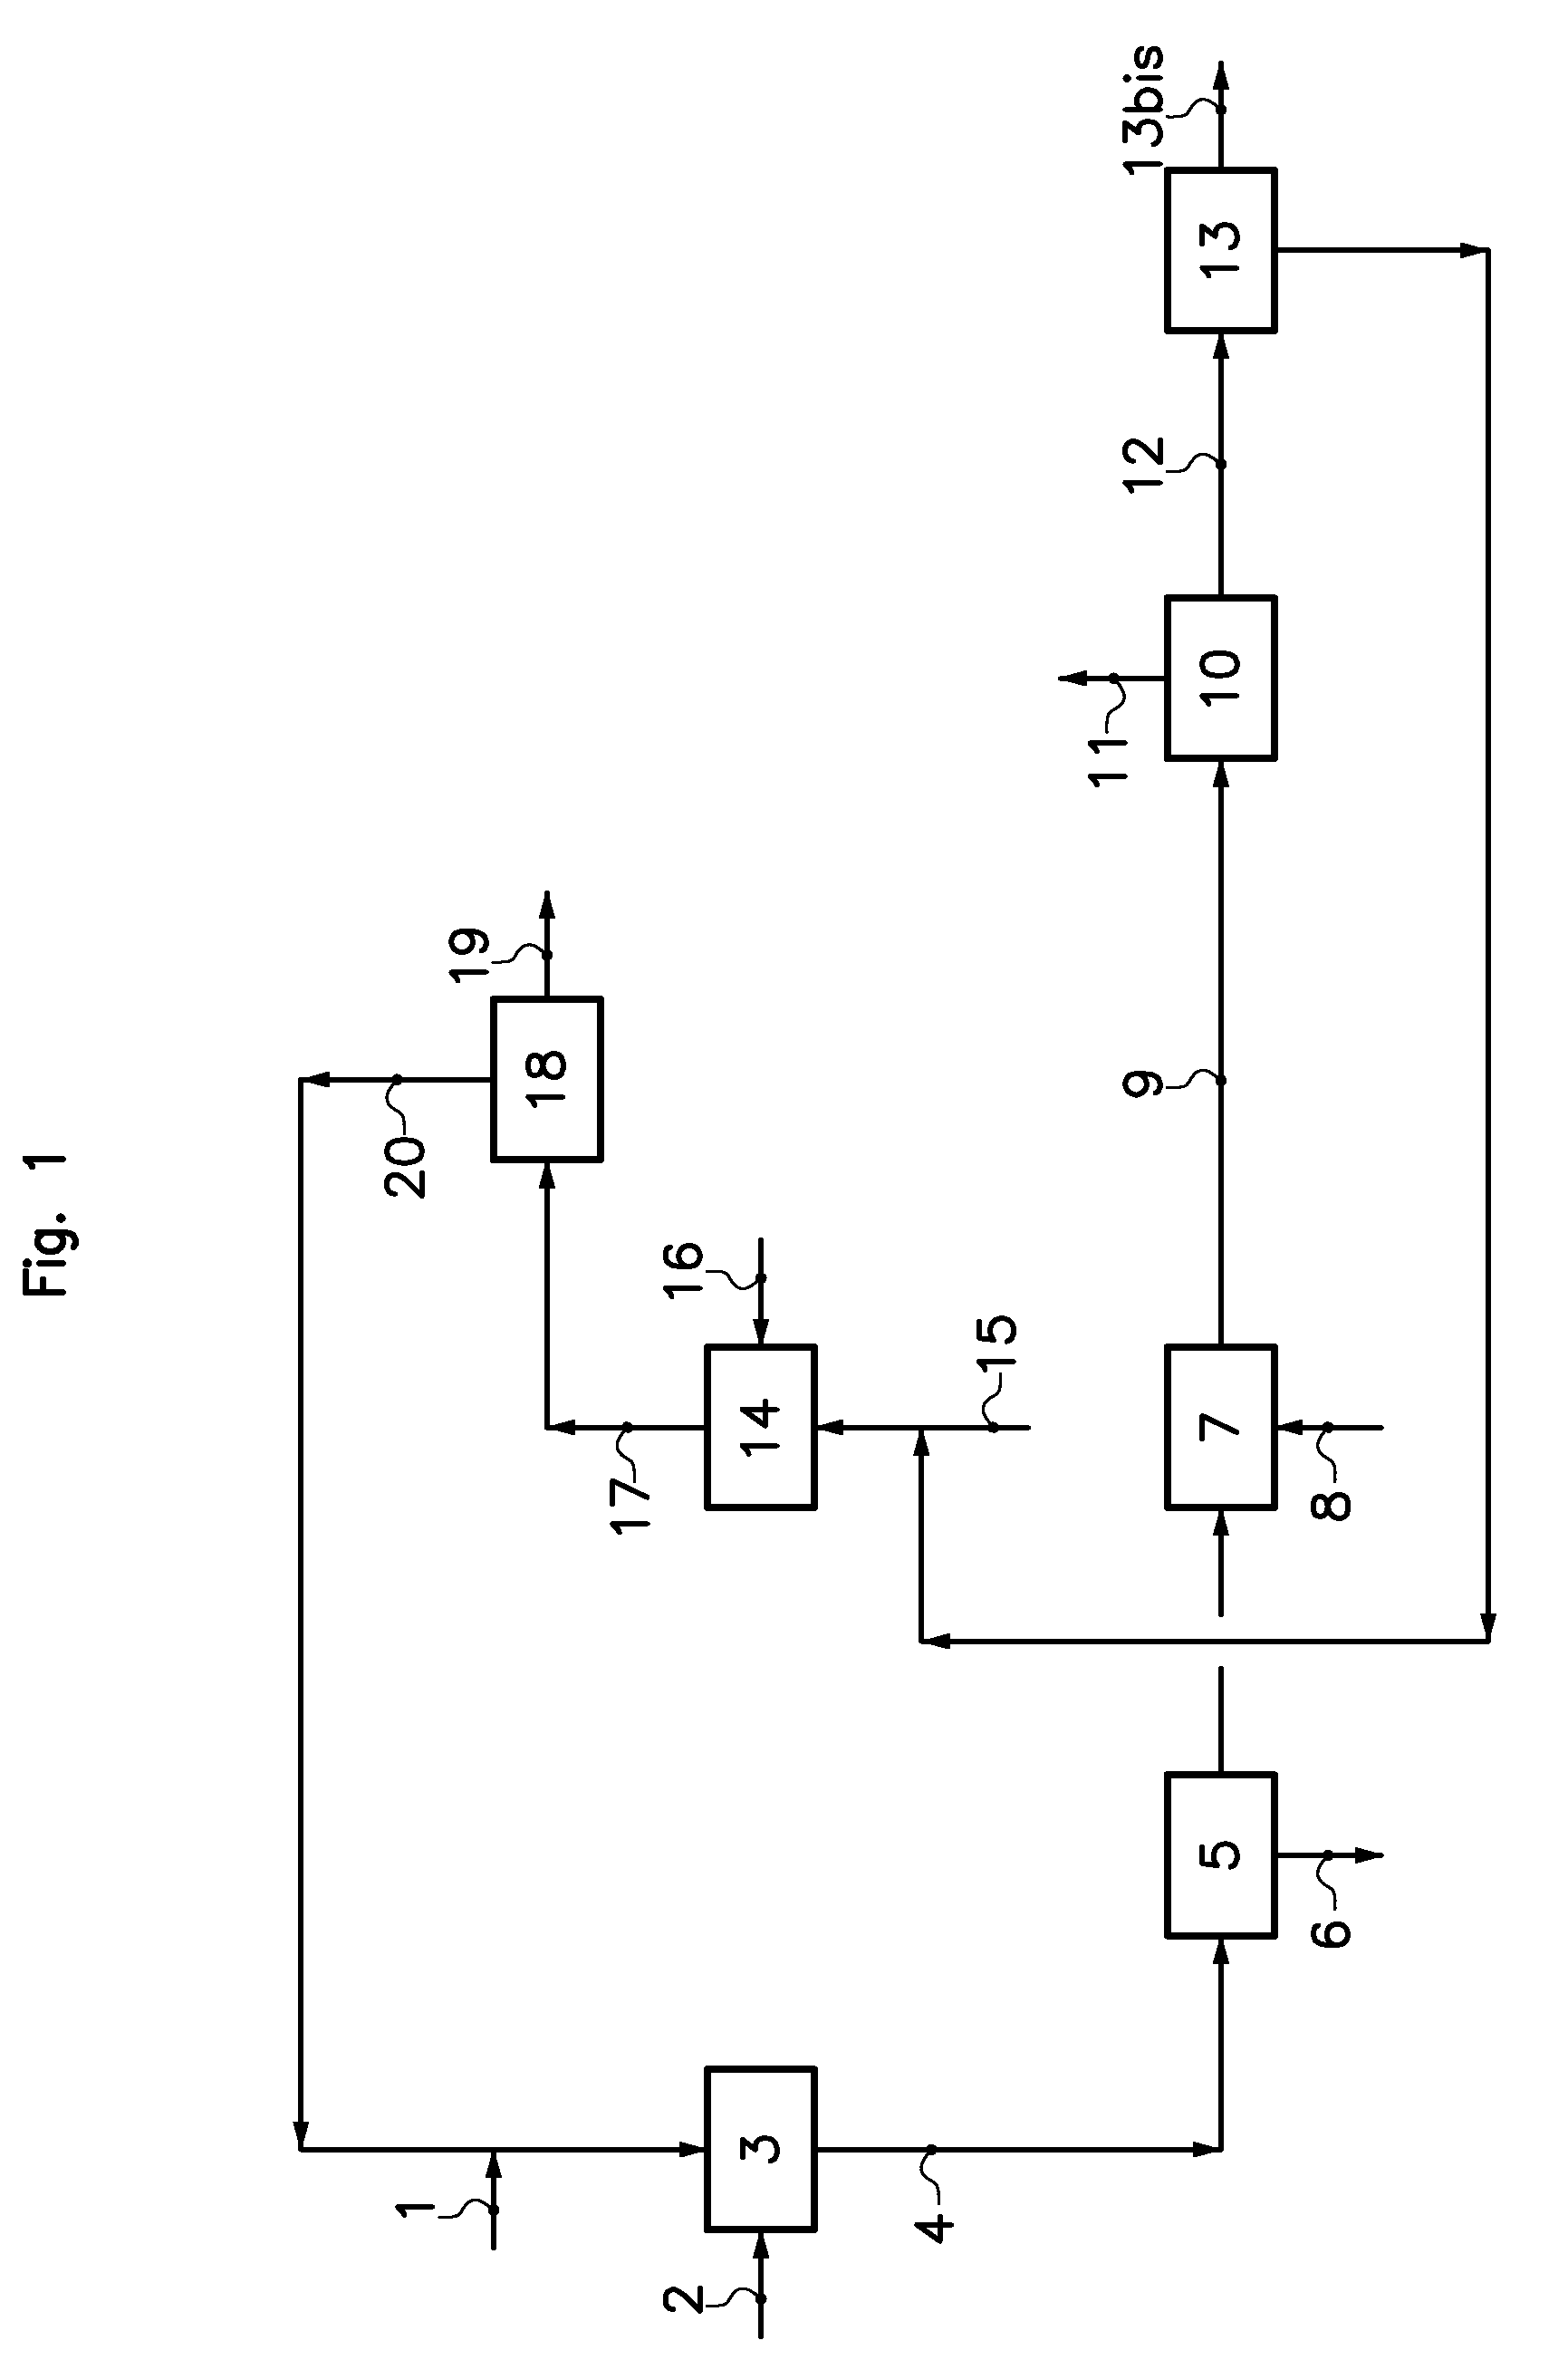 Process for the manufacture of 1,2-dichloroethane